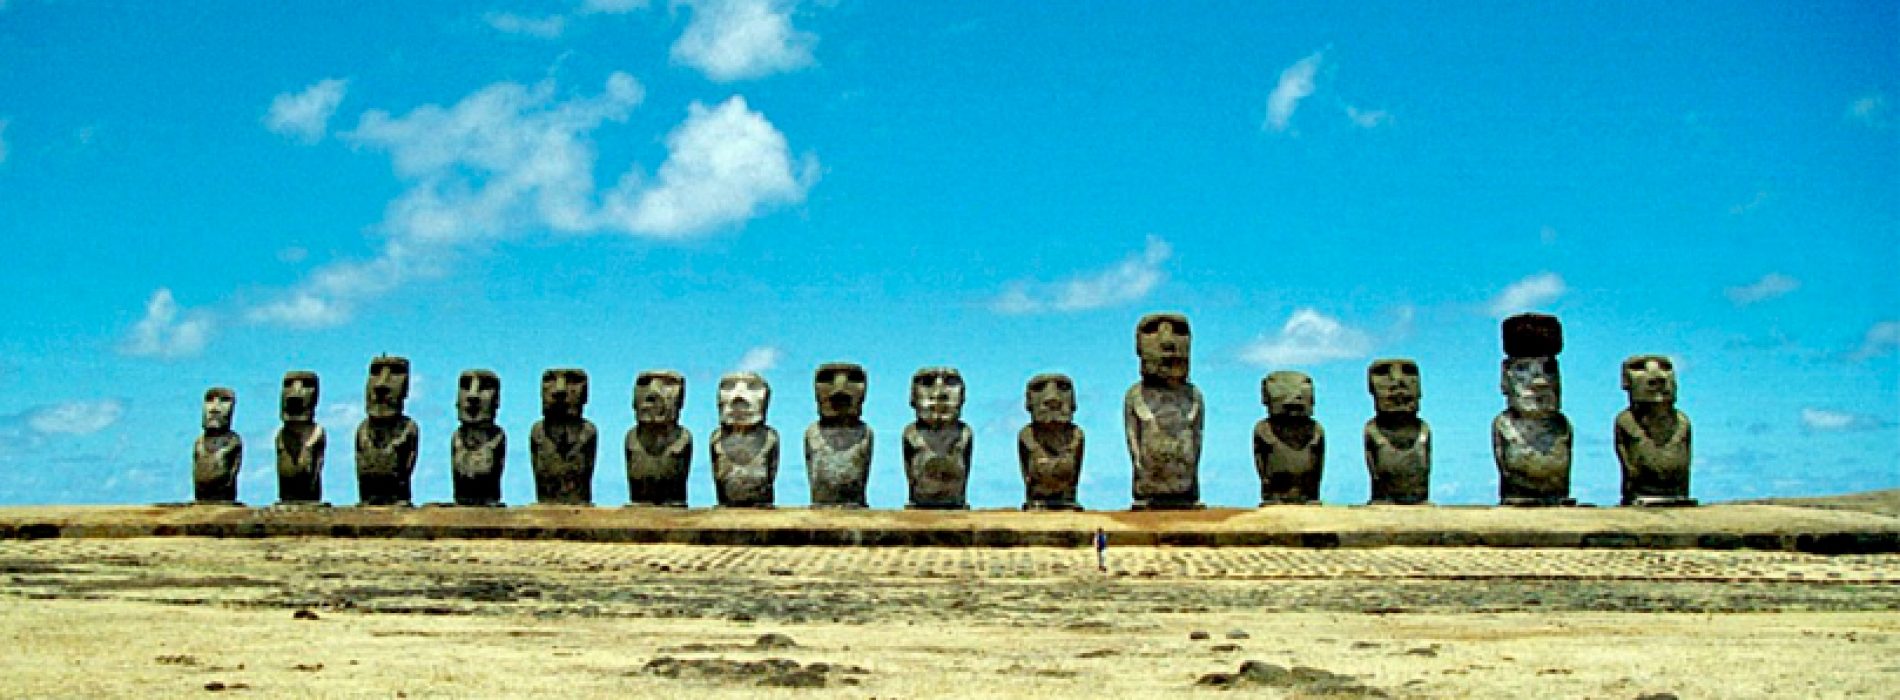 With Rapa Nui molecule they seek to treat from cancer to Parkinson's